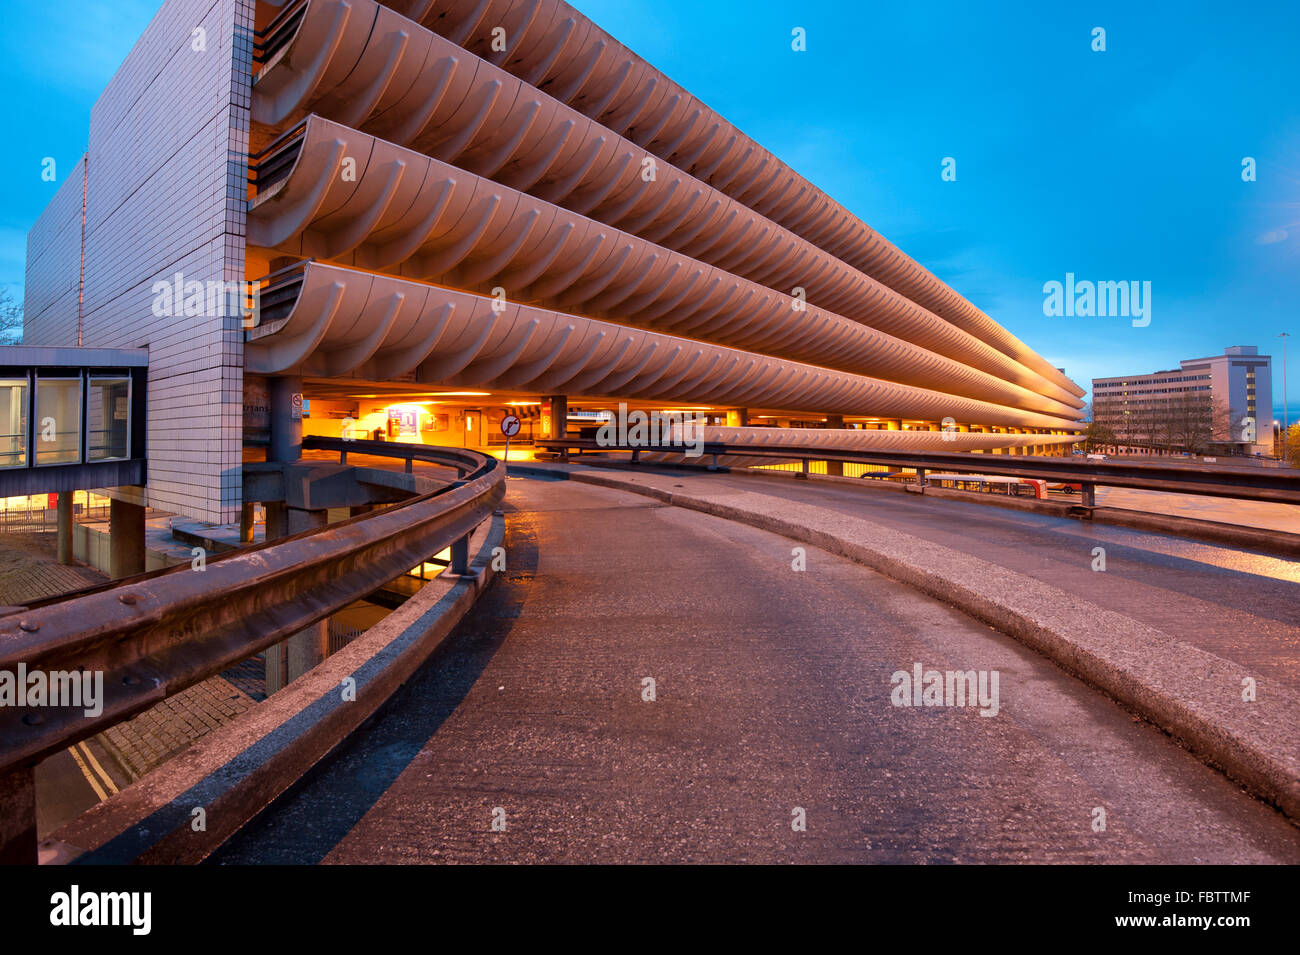 Preston Bus Station has been cited as a great example of the Brutalist architecture style. Stock Photo